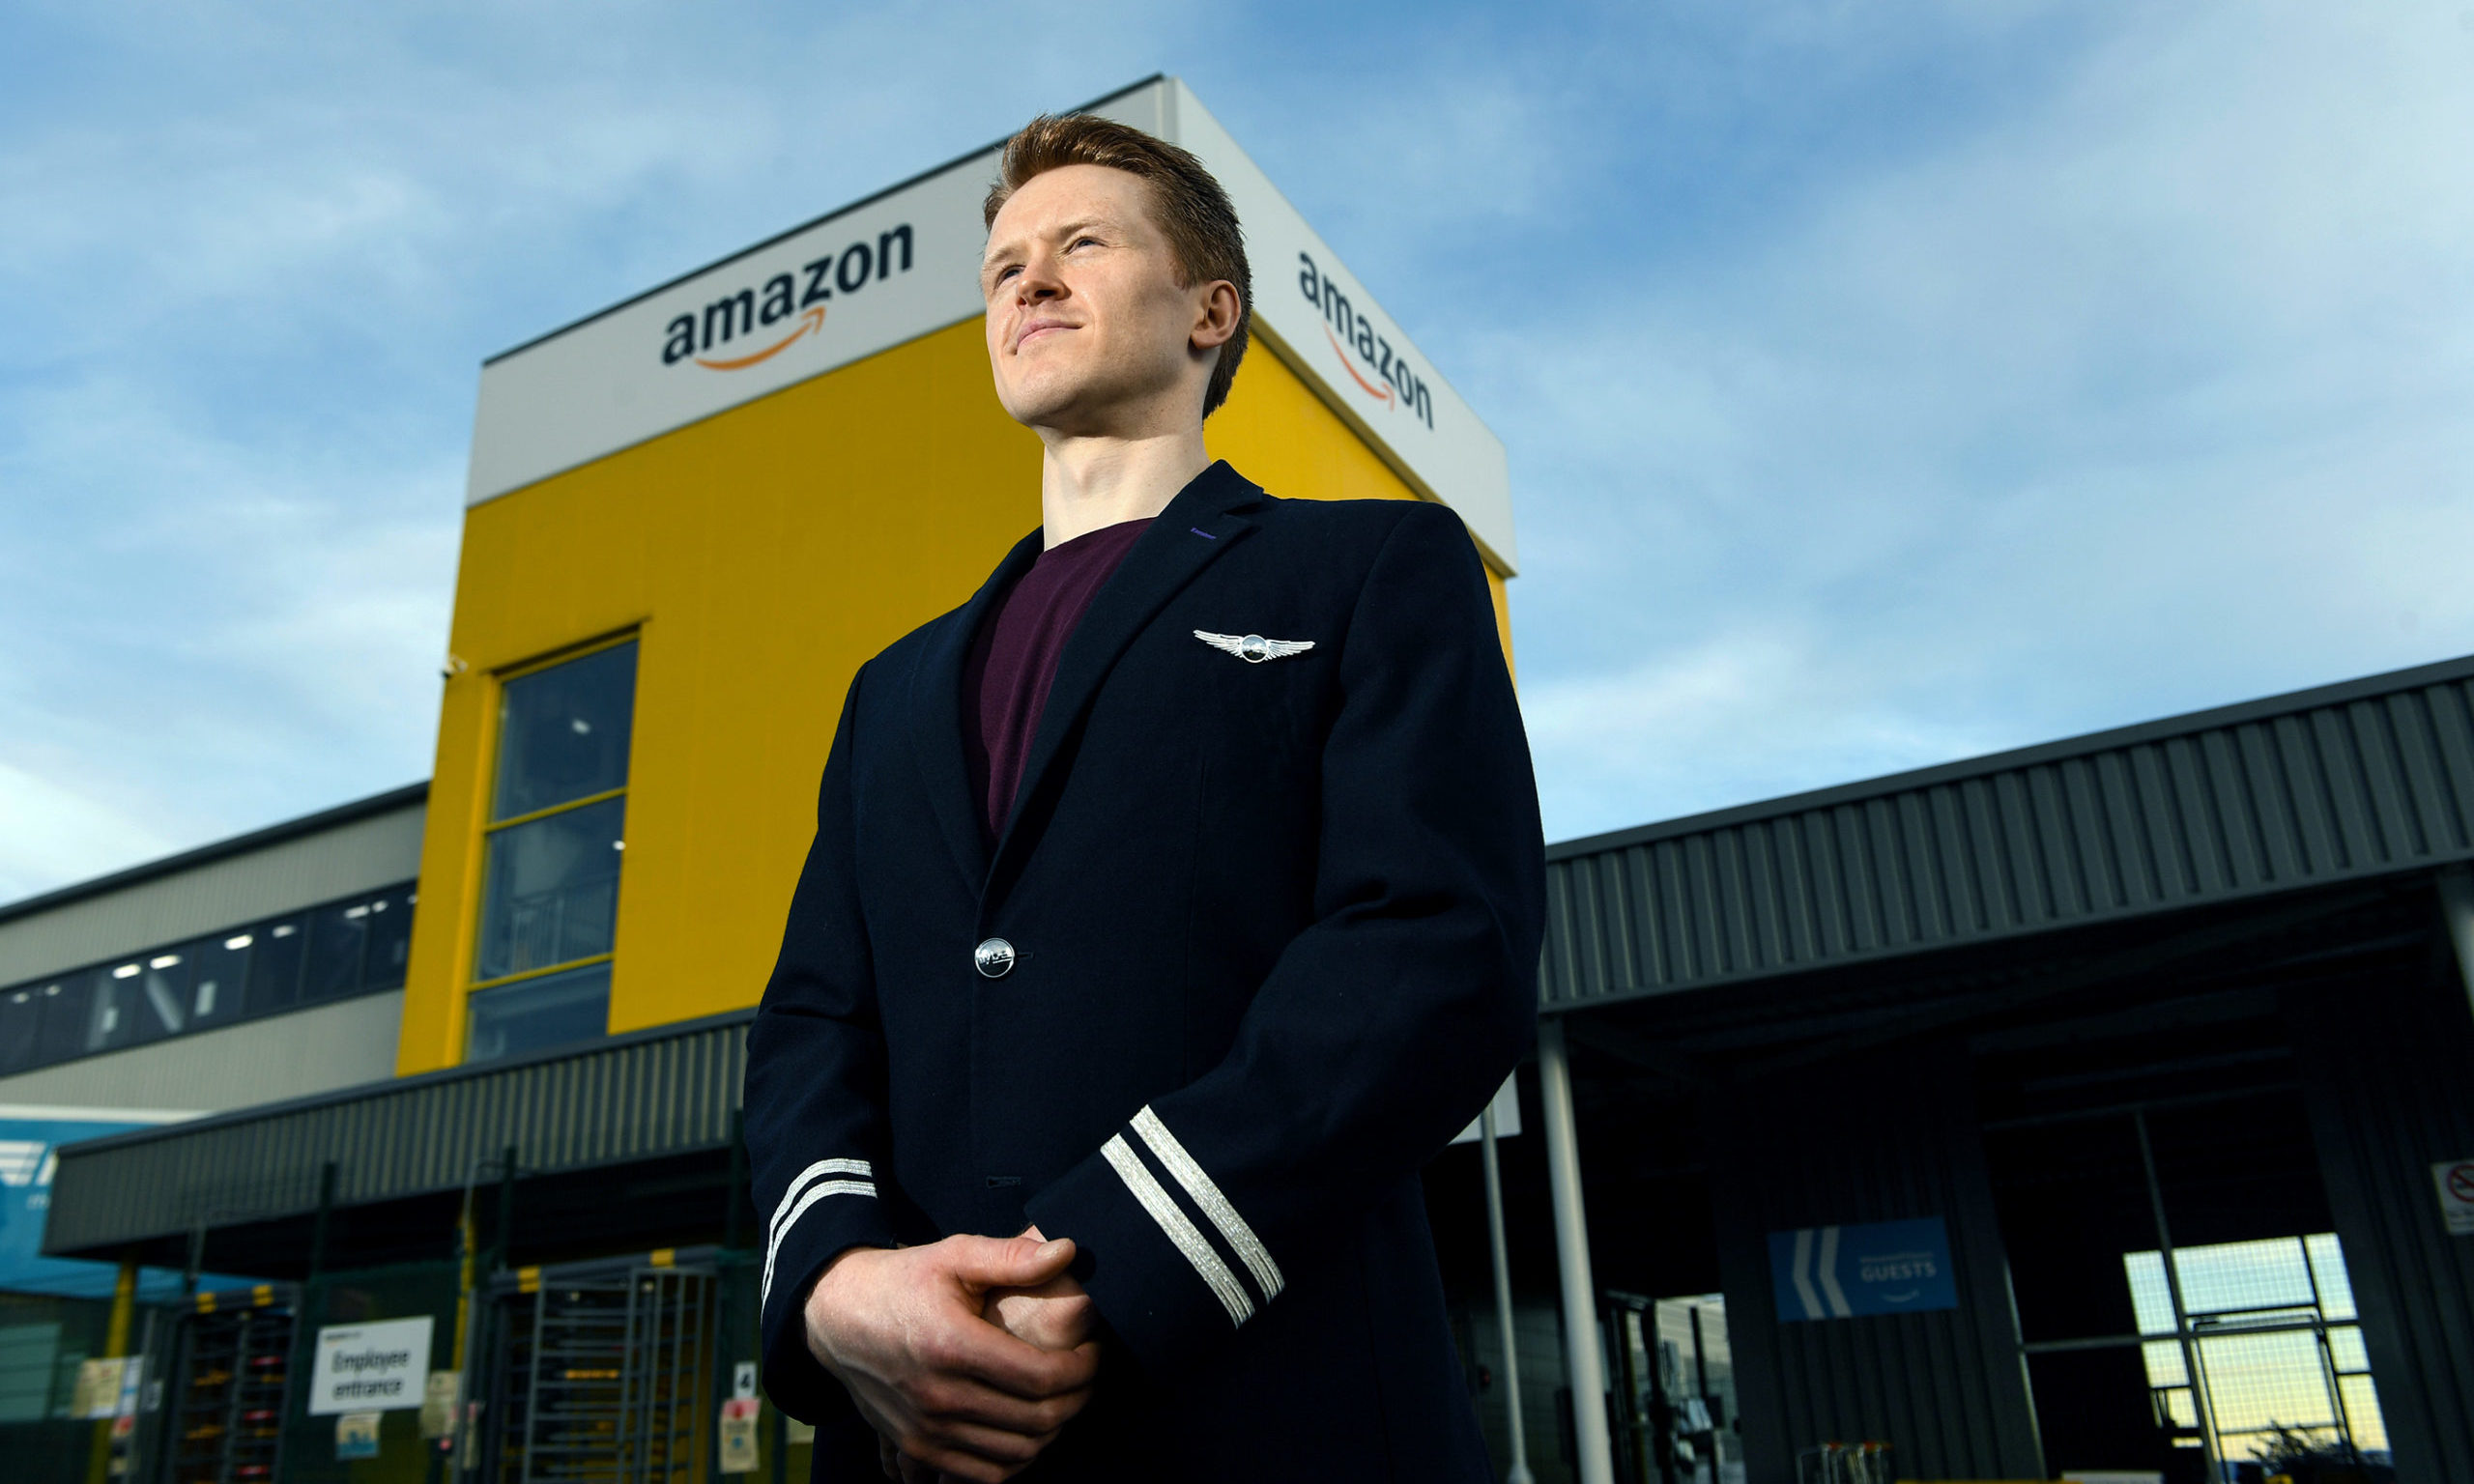 Pilor Greg Poulter Jones has started working at Amazon in Dunfermline.